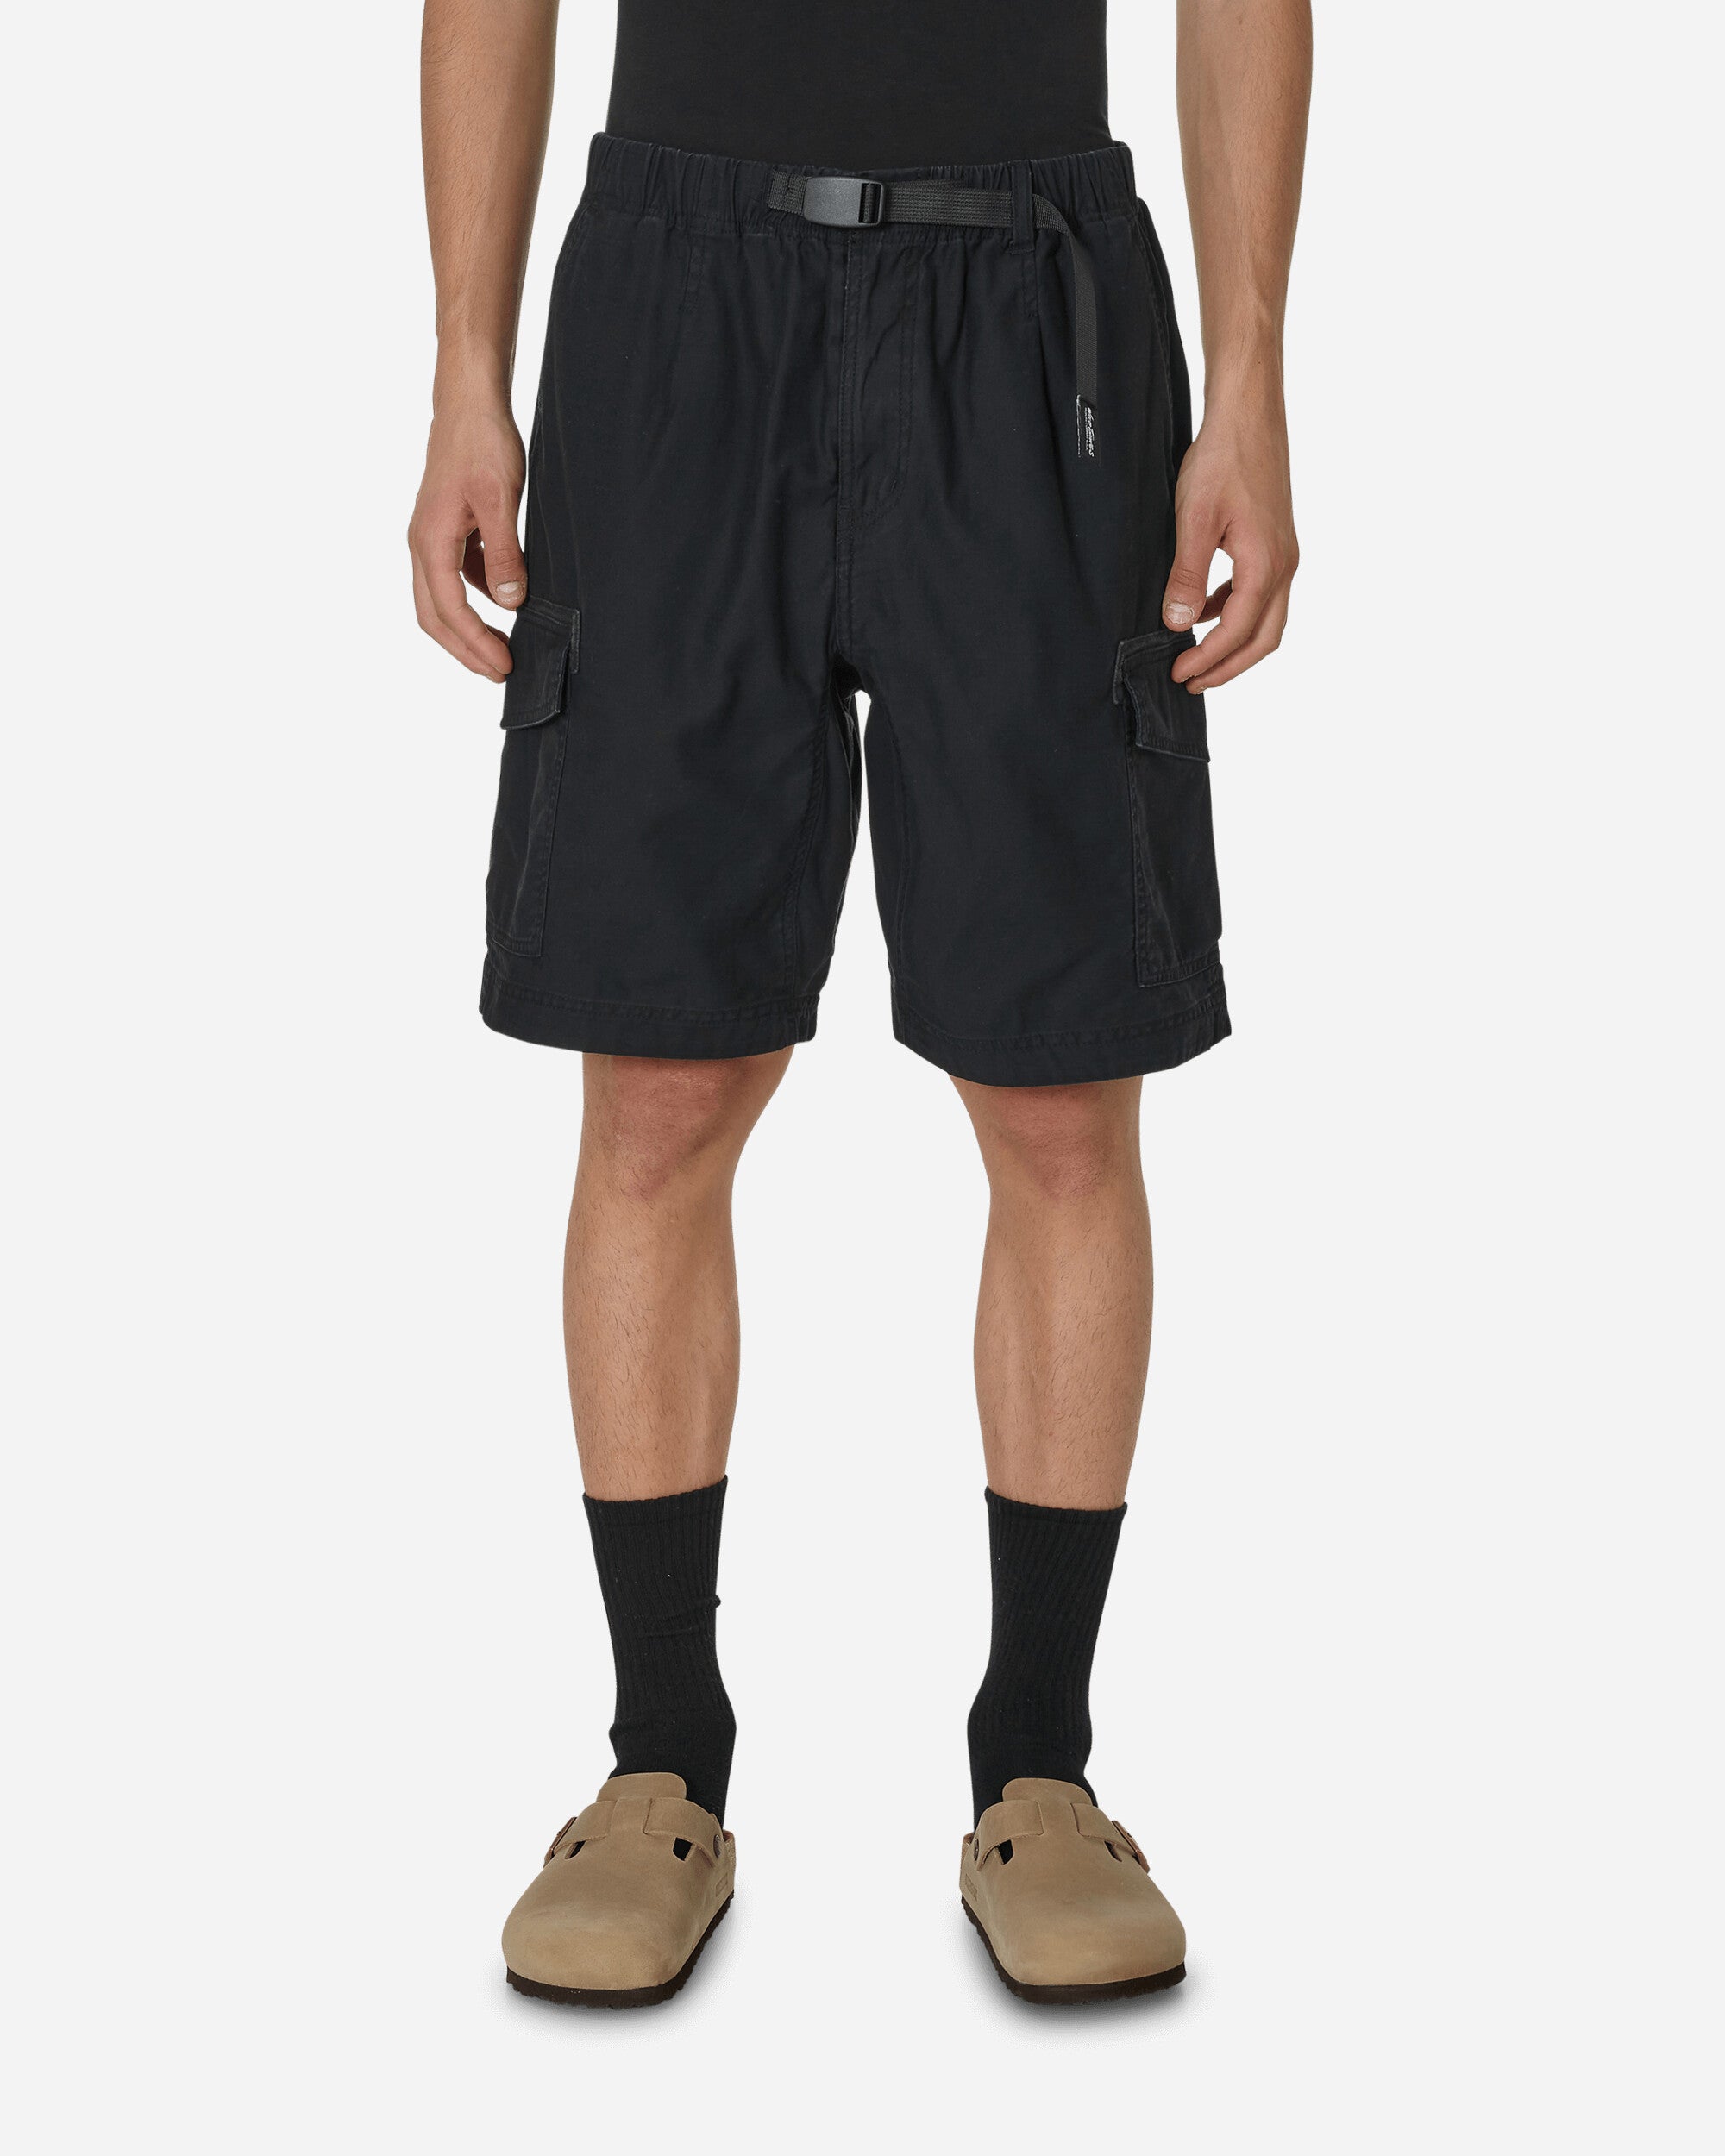 Wild Things Cotton Cargo Shorts Black - Slam Jam® Official Store